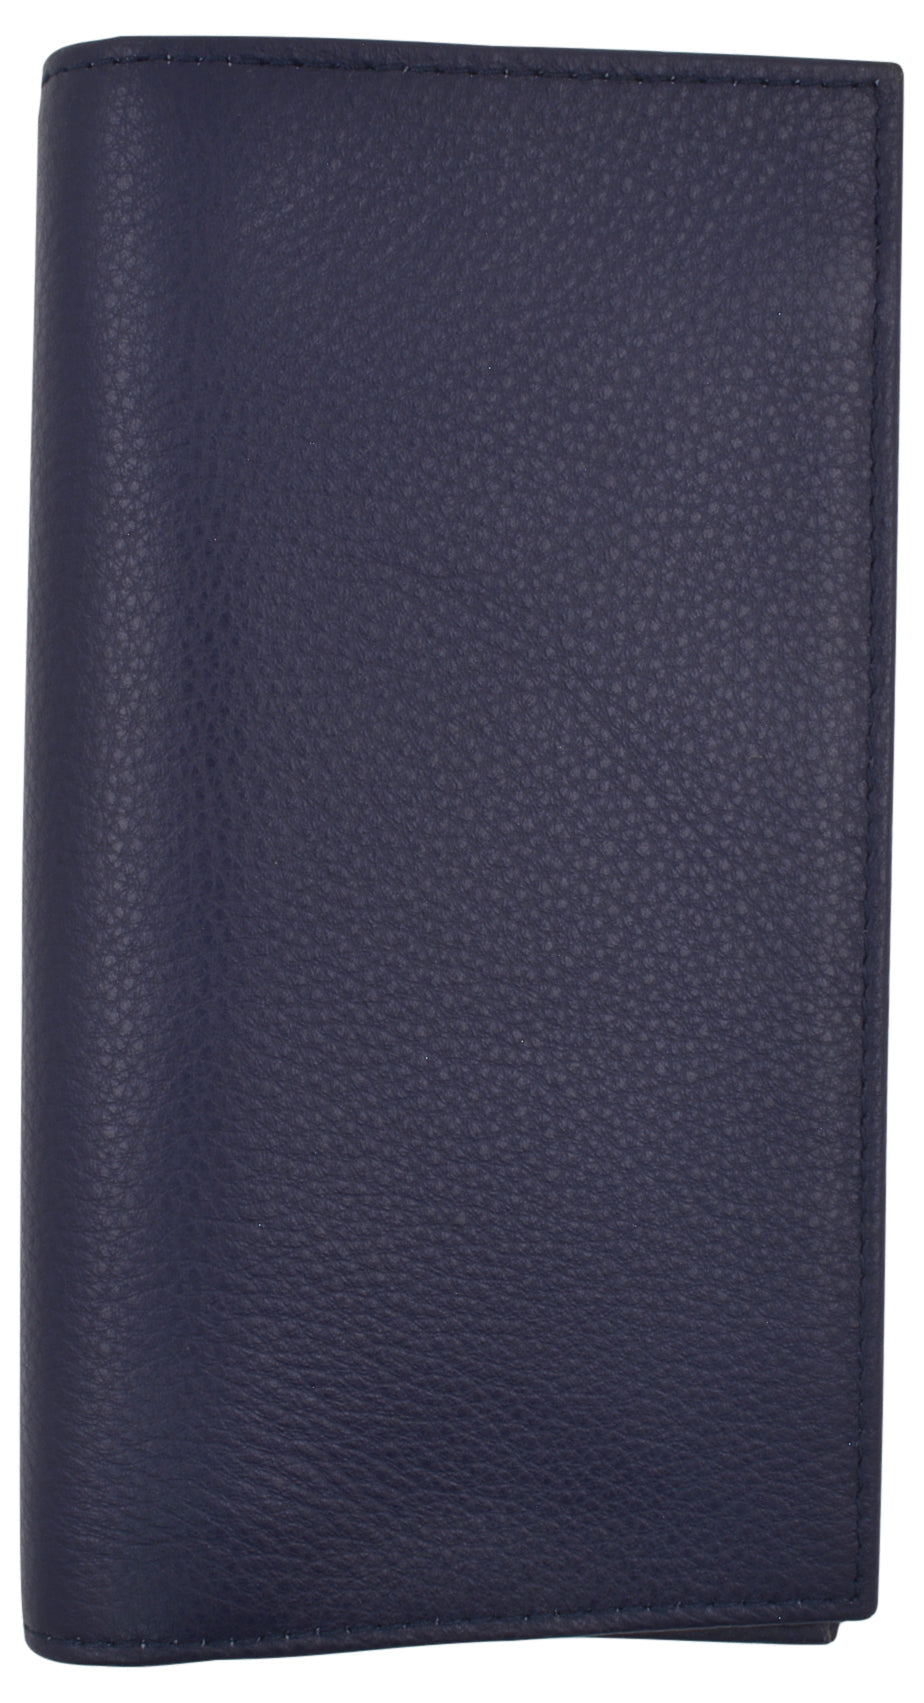 Basic Genuine Leather Checkbook Cover Colors Image 4